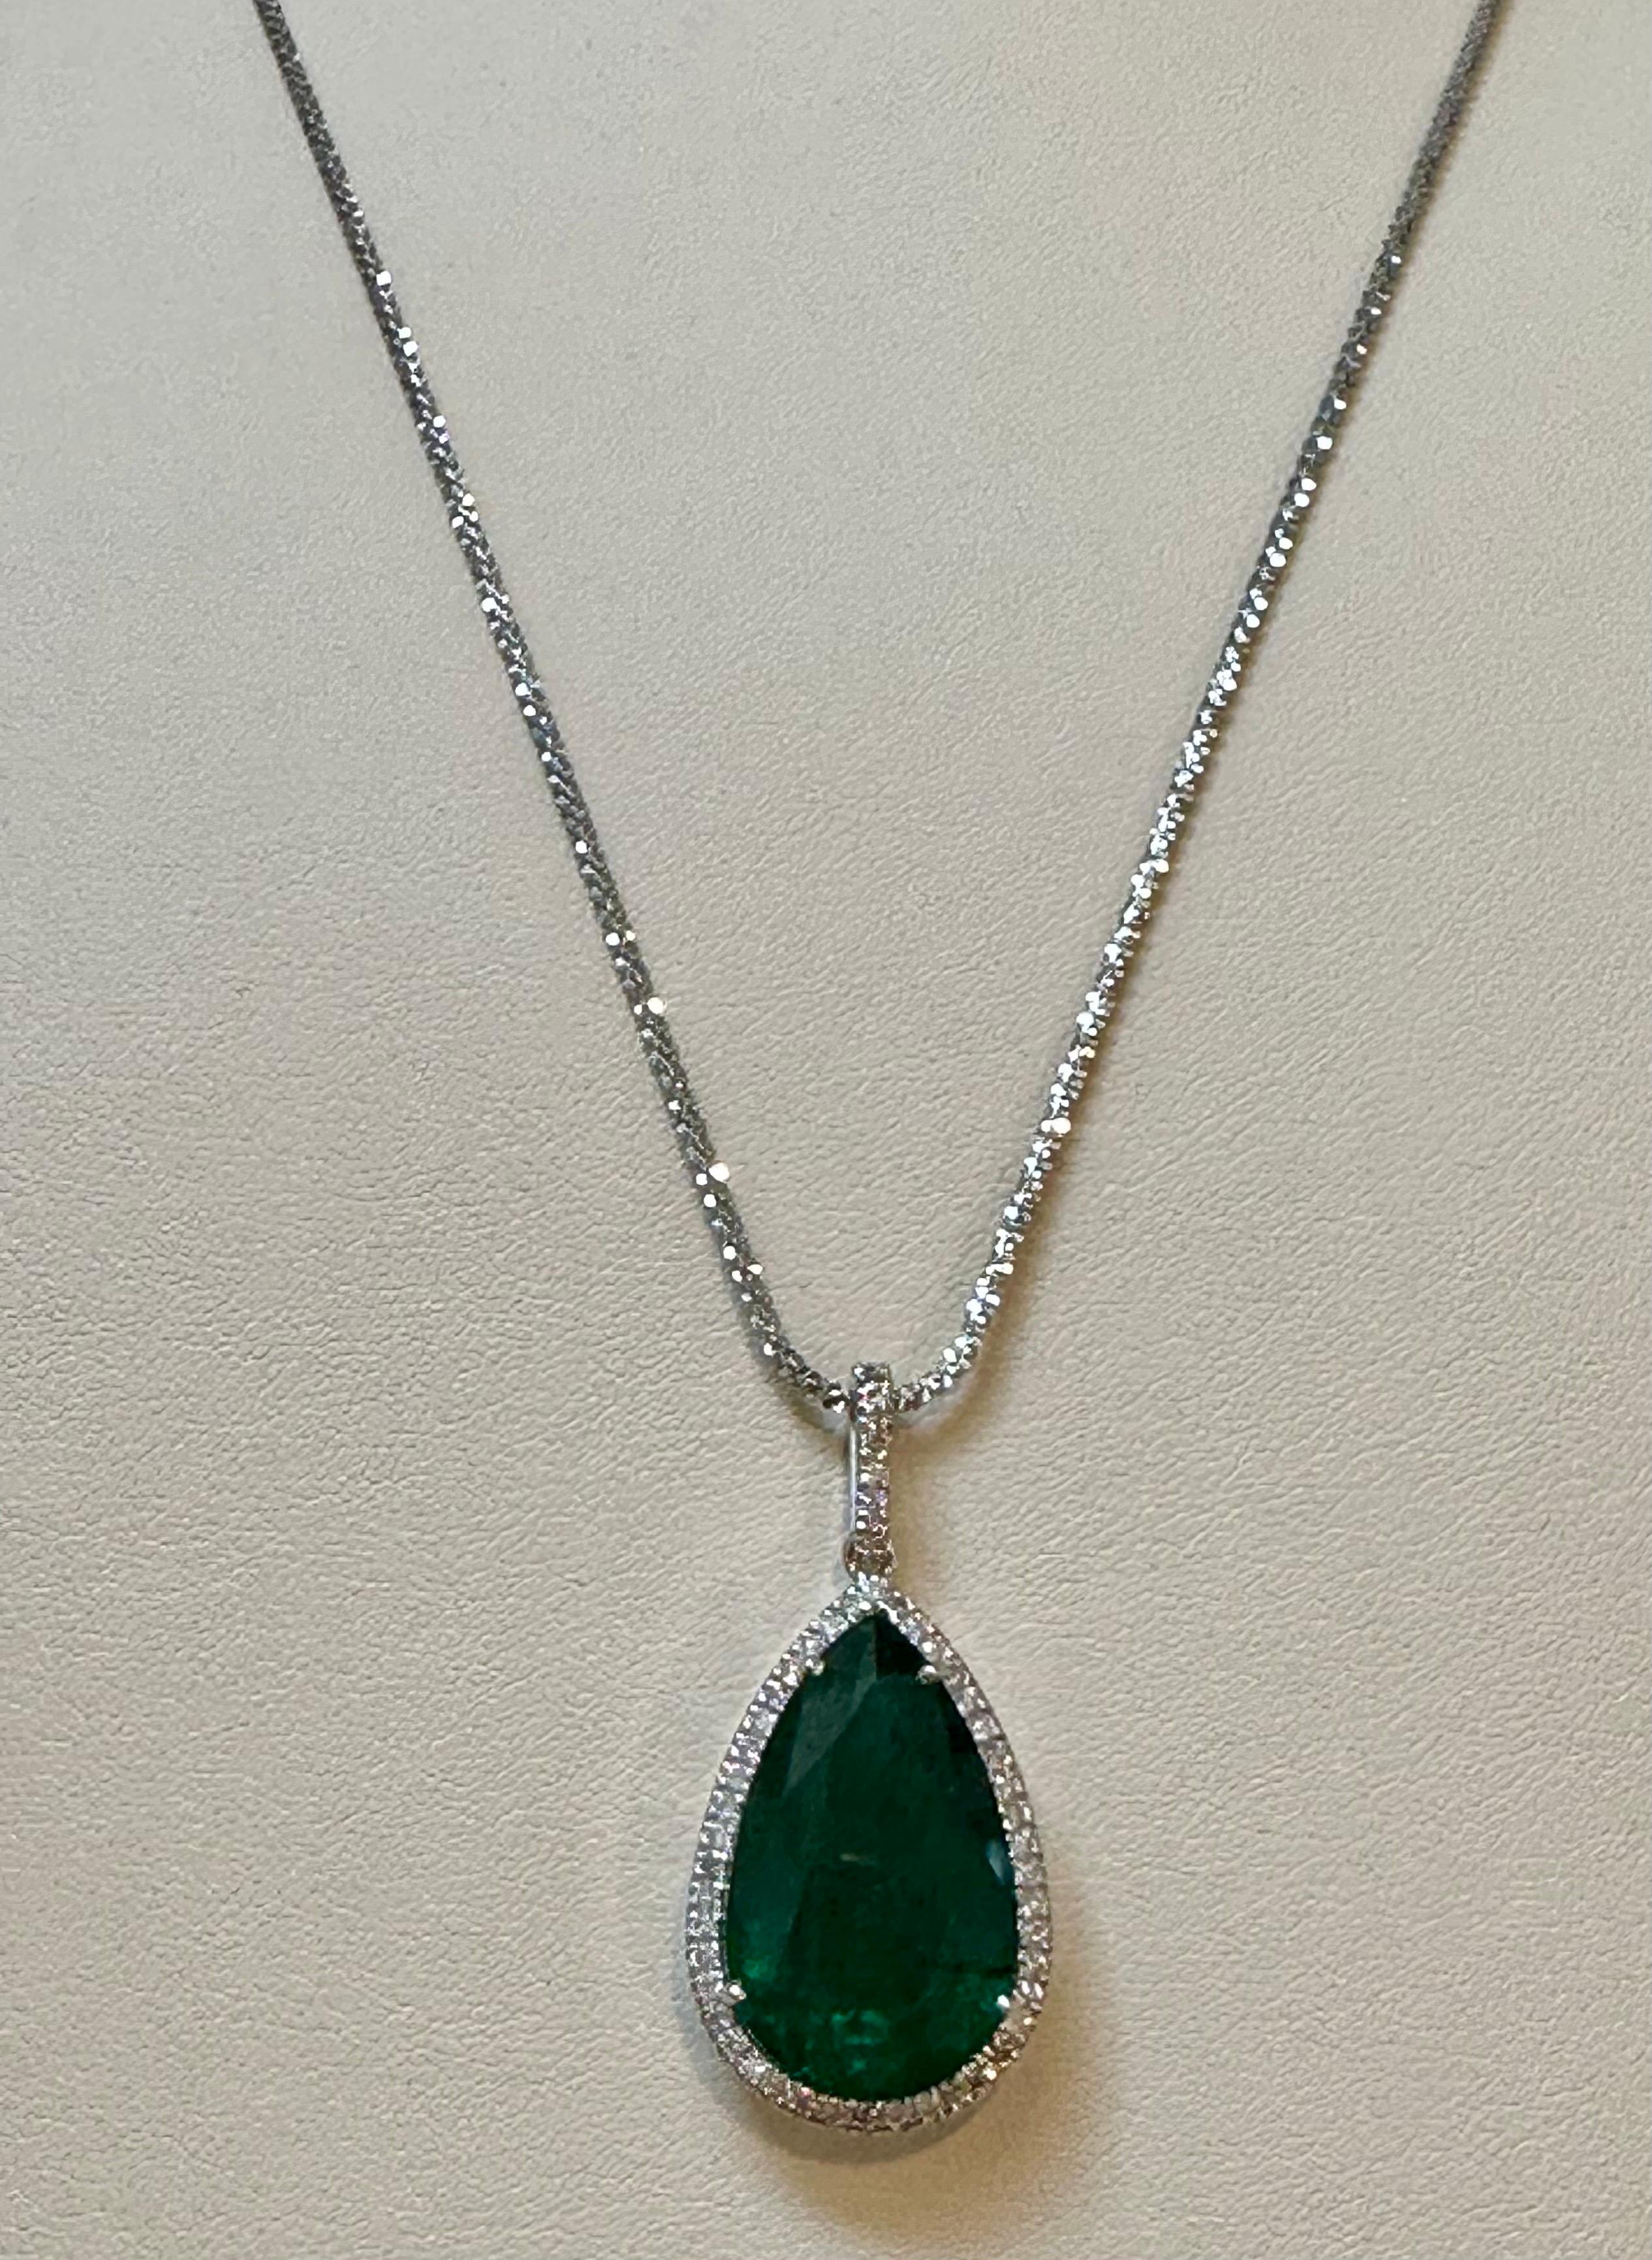 19 Ct Pear Cut Emerald & 1 Ct Diamond Halo Pendent/Necklace 14 KW Gold Chain For Sale 5